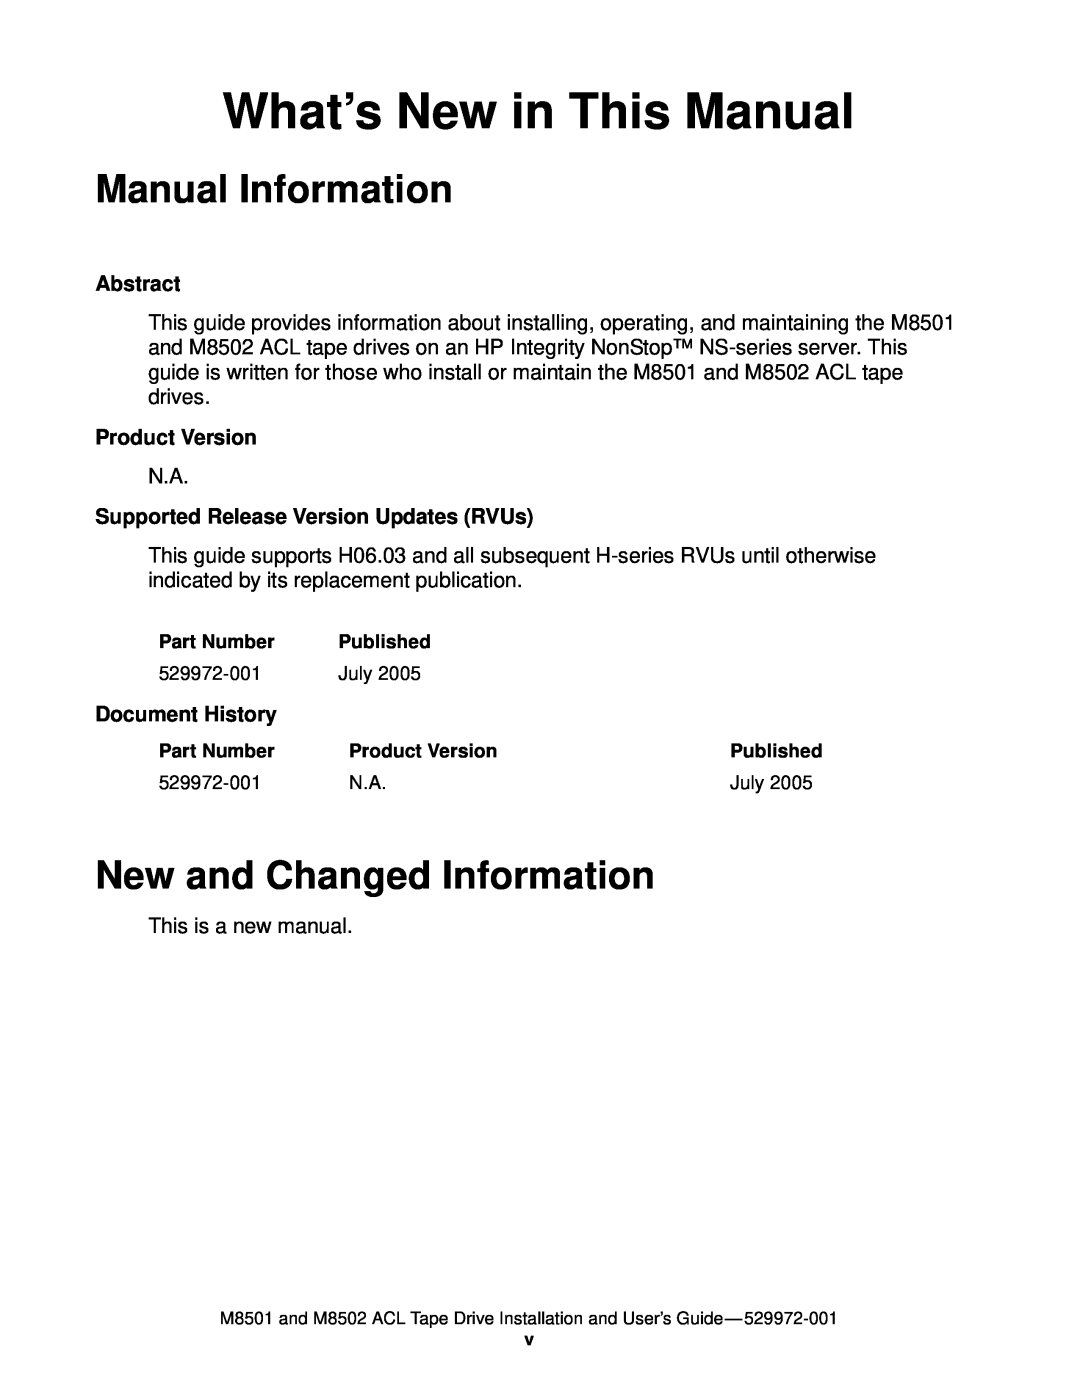 SMC Networks M8501 What’s New in This Manual, Manual Information, New and Changed Information, Abstract, Product Version 